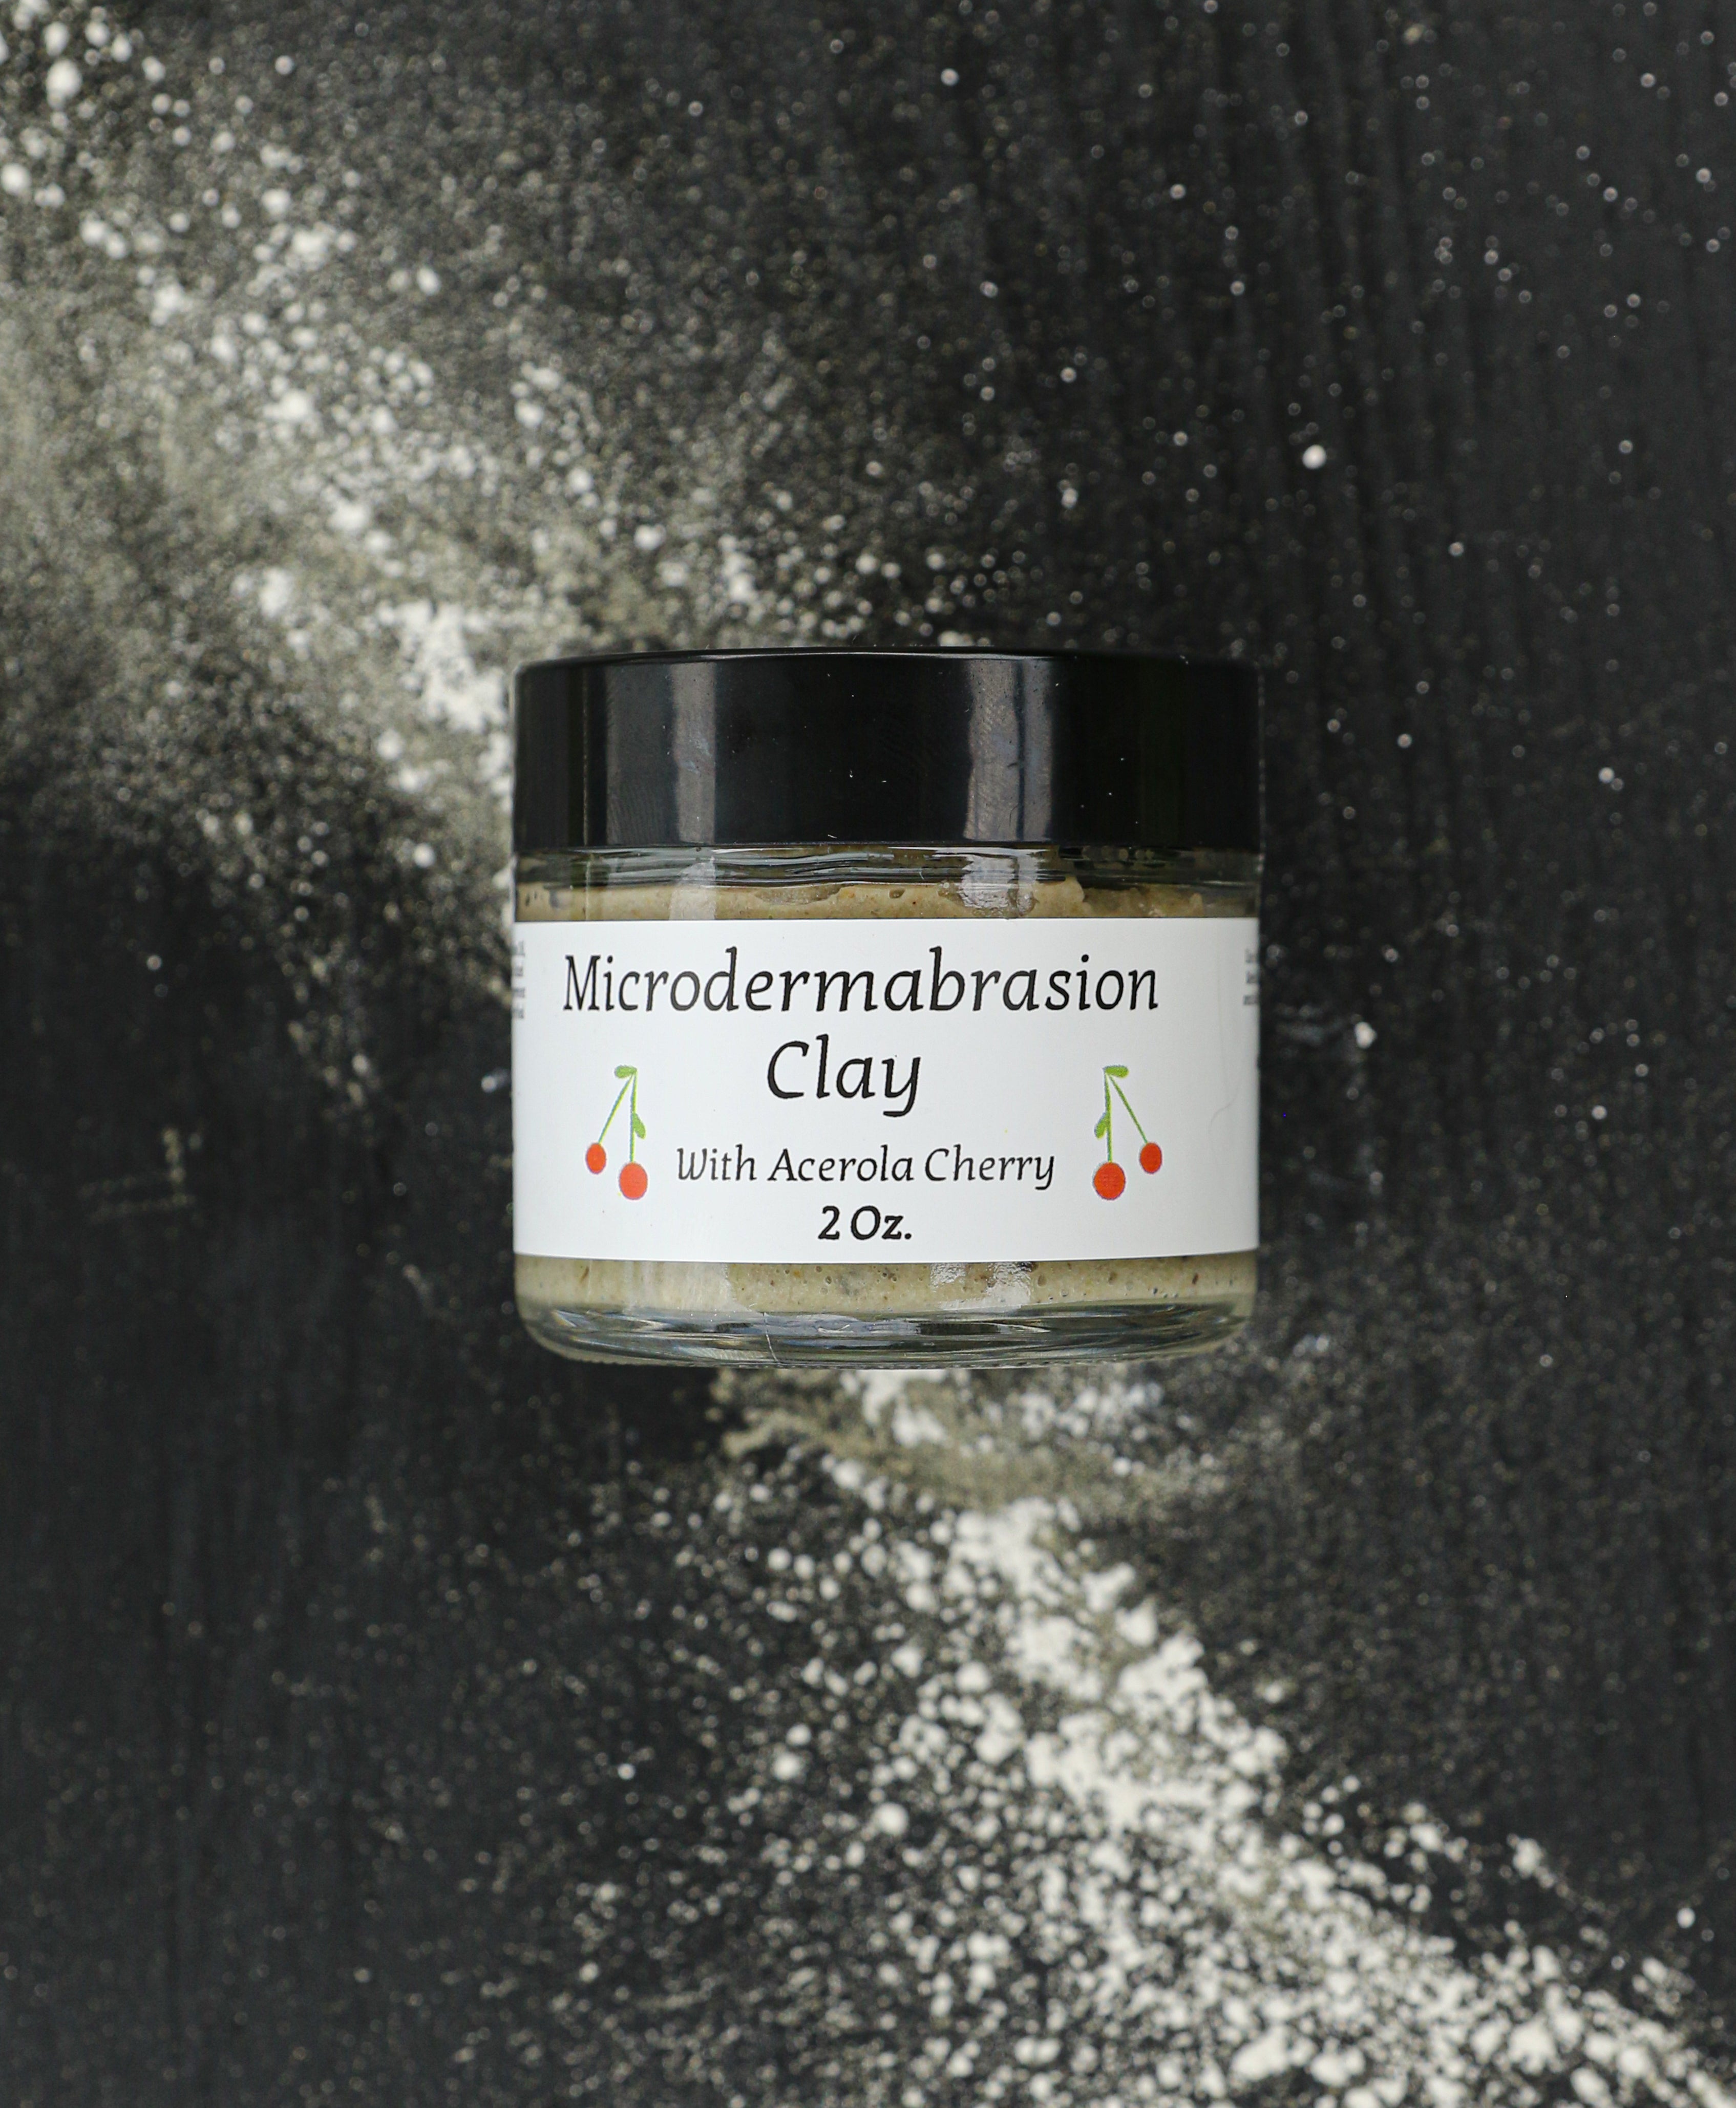 Microdermabrasion Clay